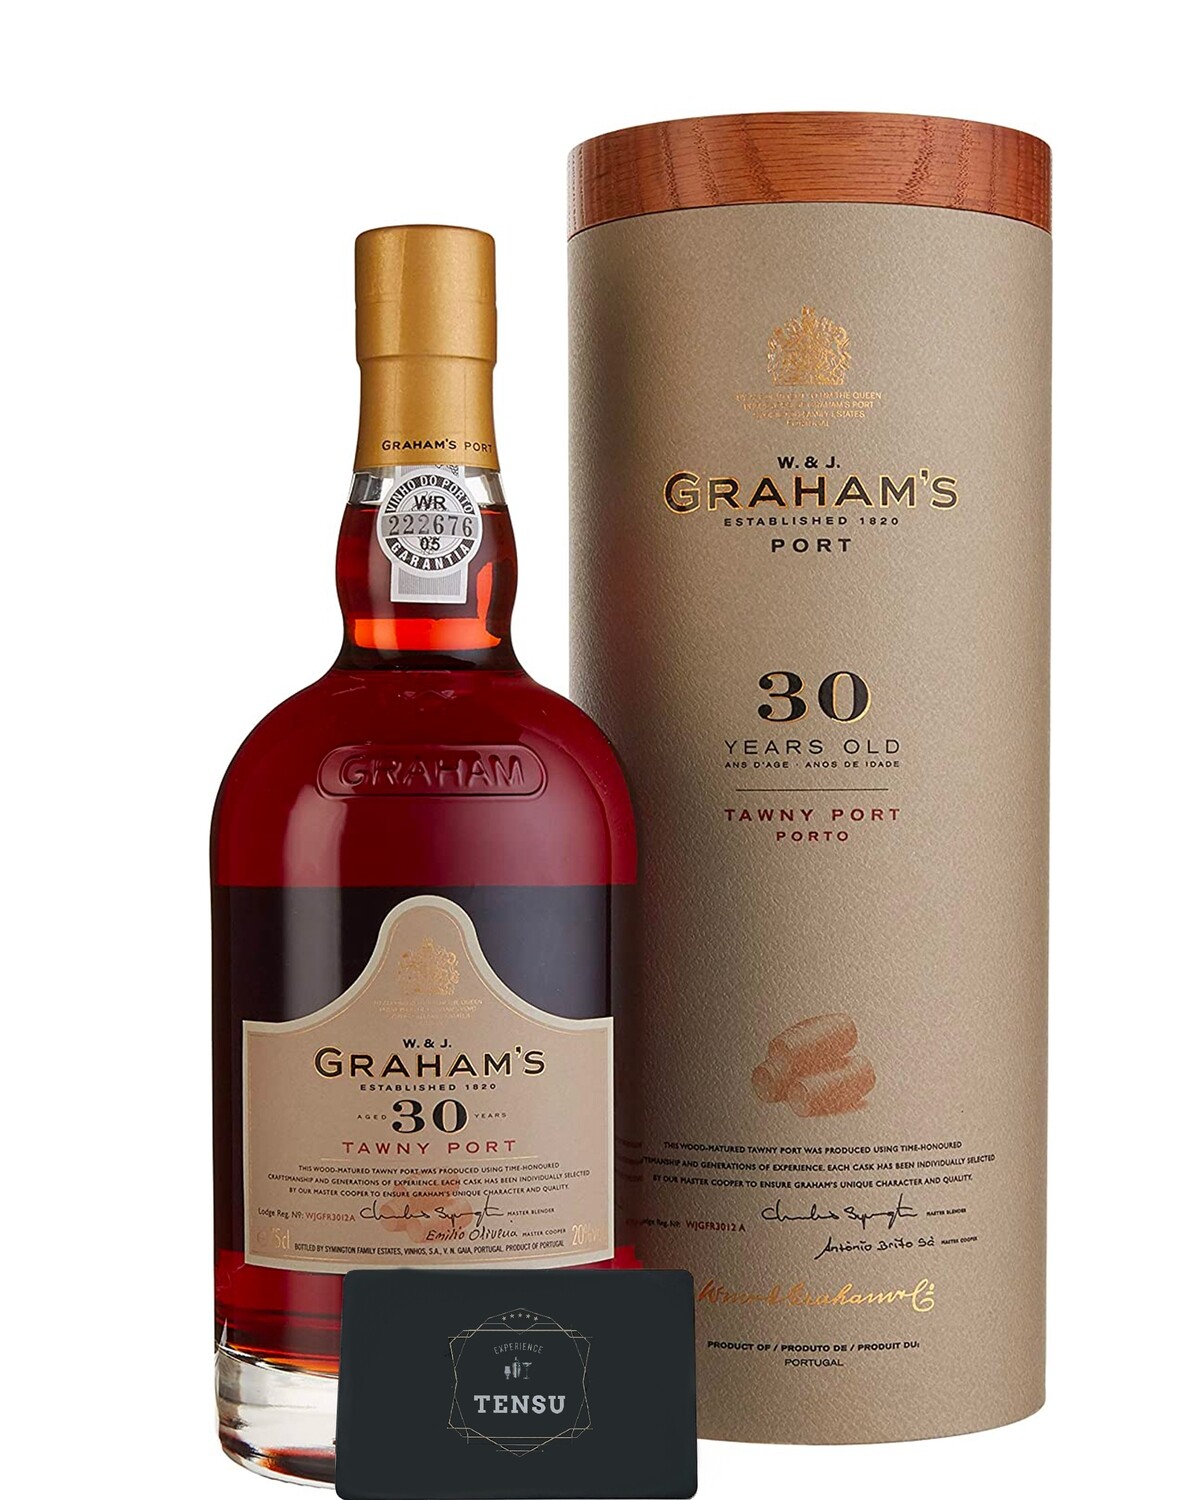 Graham's 30 Year Old - Tawny Port - (Luxe Giftbox) 20.0% (0.75 Liter)